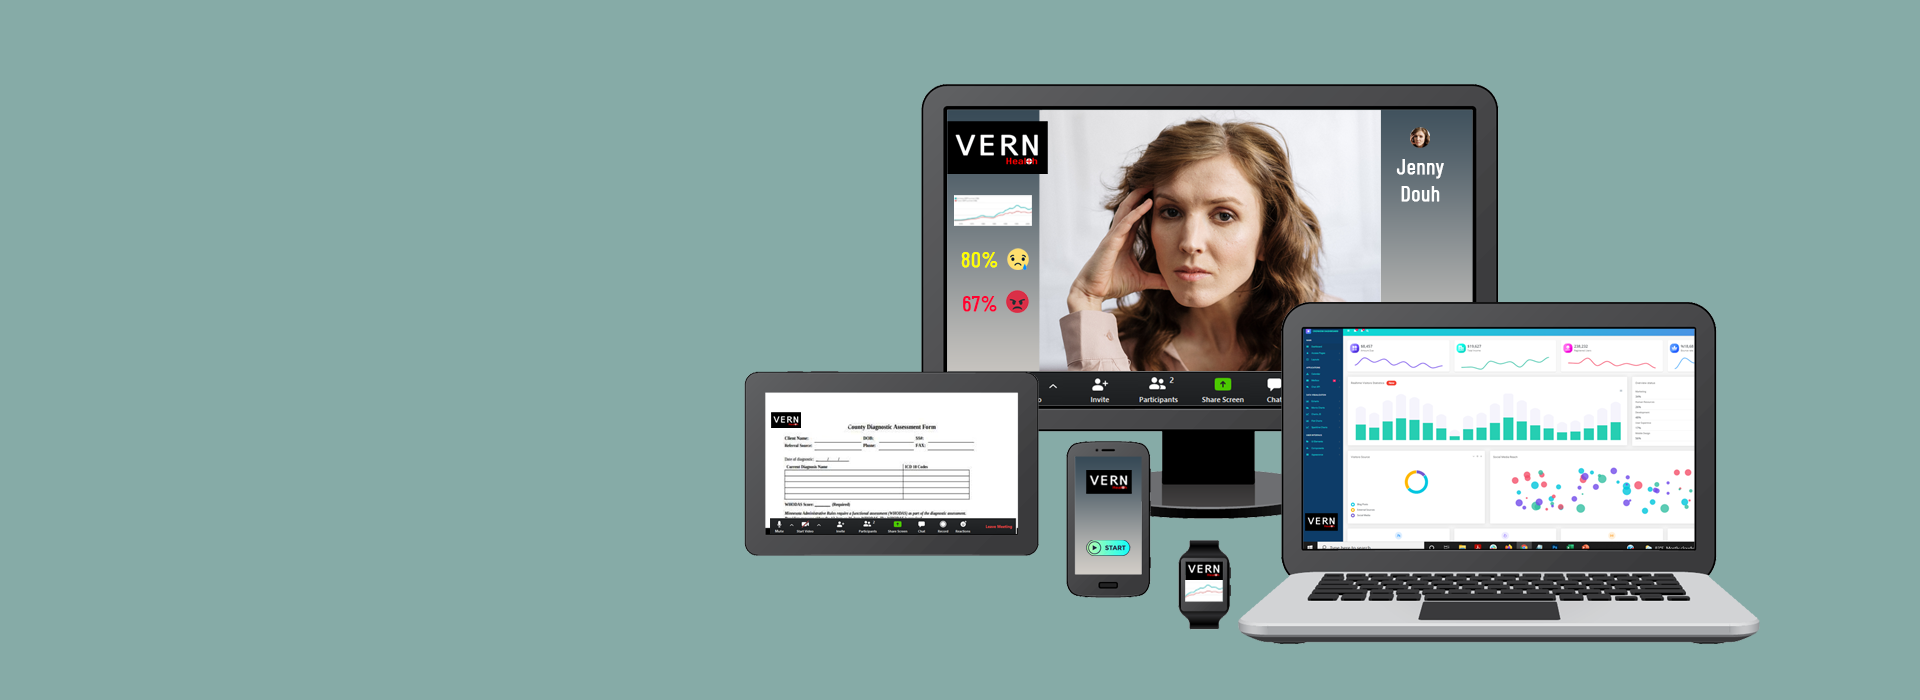 VERN Health Product Features Slider26